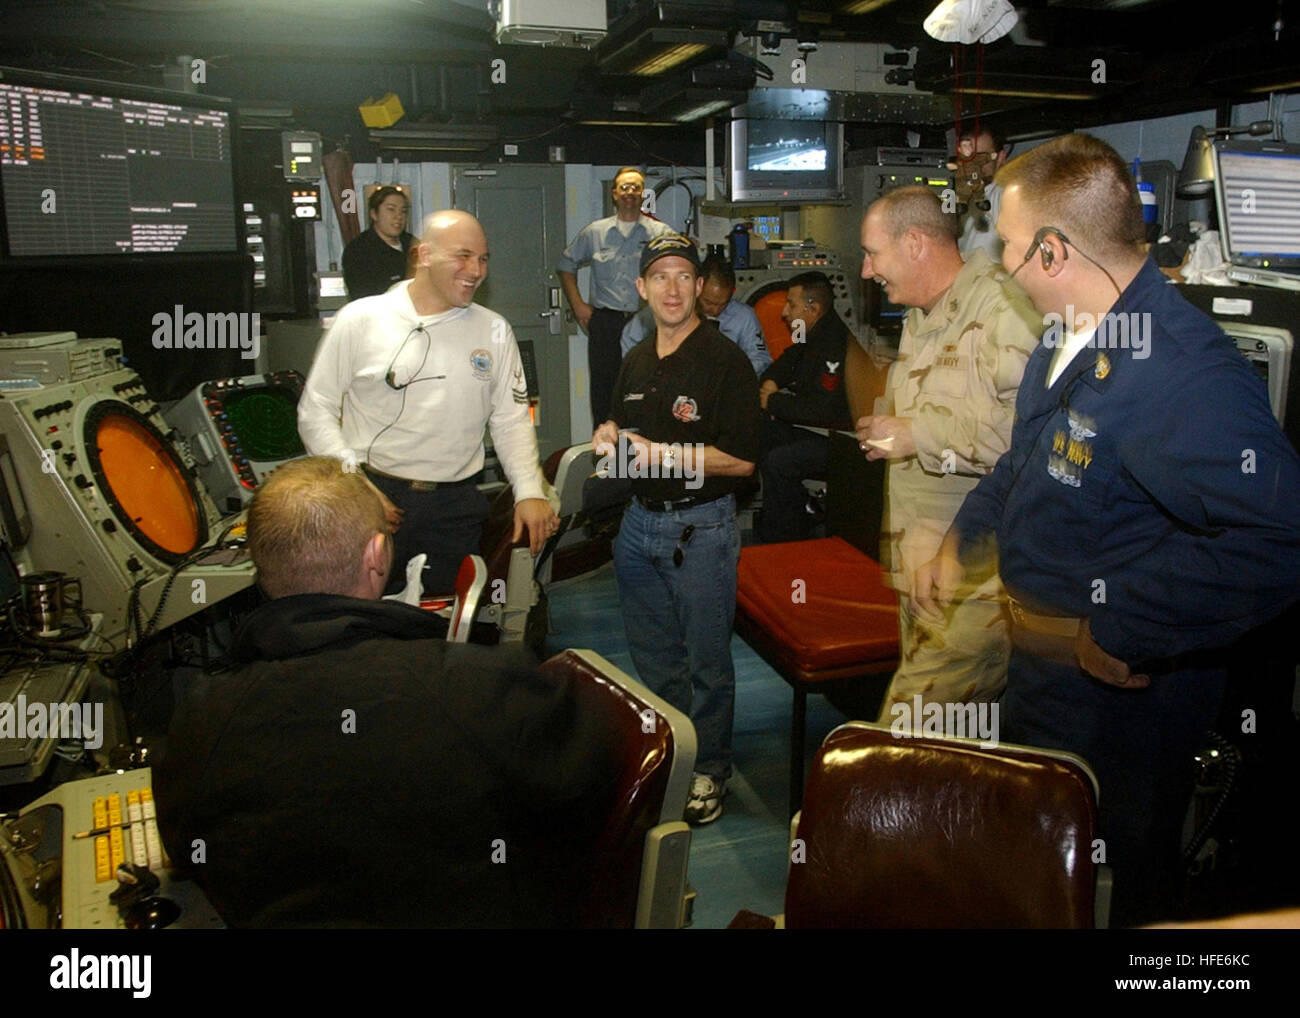 041207-N-2984R-084 Persian Gulf (Dec. 7, 2004) - NASCAR Nextel Cup driver John Andretti pays a visit to the Air Traffic Control crew in the Carrier Air Traffic Control Center (CATCC) aboard the Nimitz-class aircraft carrier USS Harry S. Truman (CVN 75). Carrier Air Wing Three (CVW-3) embarked aboard Truman is providing close air support and conducting intelligence, surveillance and reconnaissance missions over Iraq. TrumanÕs Carrier Strike Group Ten (CSG-10) and CVW-3 are on a regularly scheduled deployment in support of the Global War on Terrorism. U.S. Navy photo by Photographer's Mate Airma Stock Photo